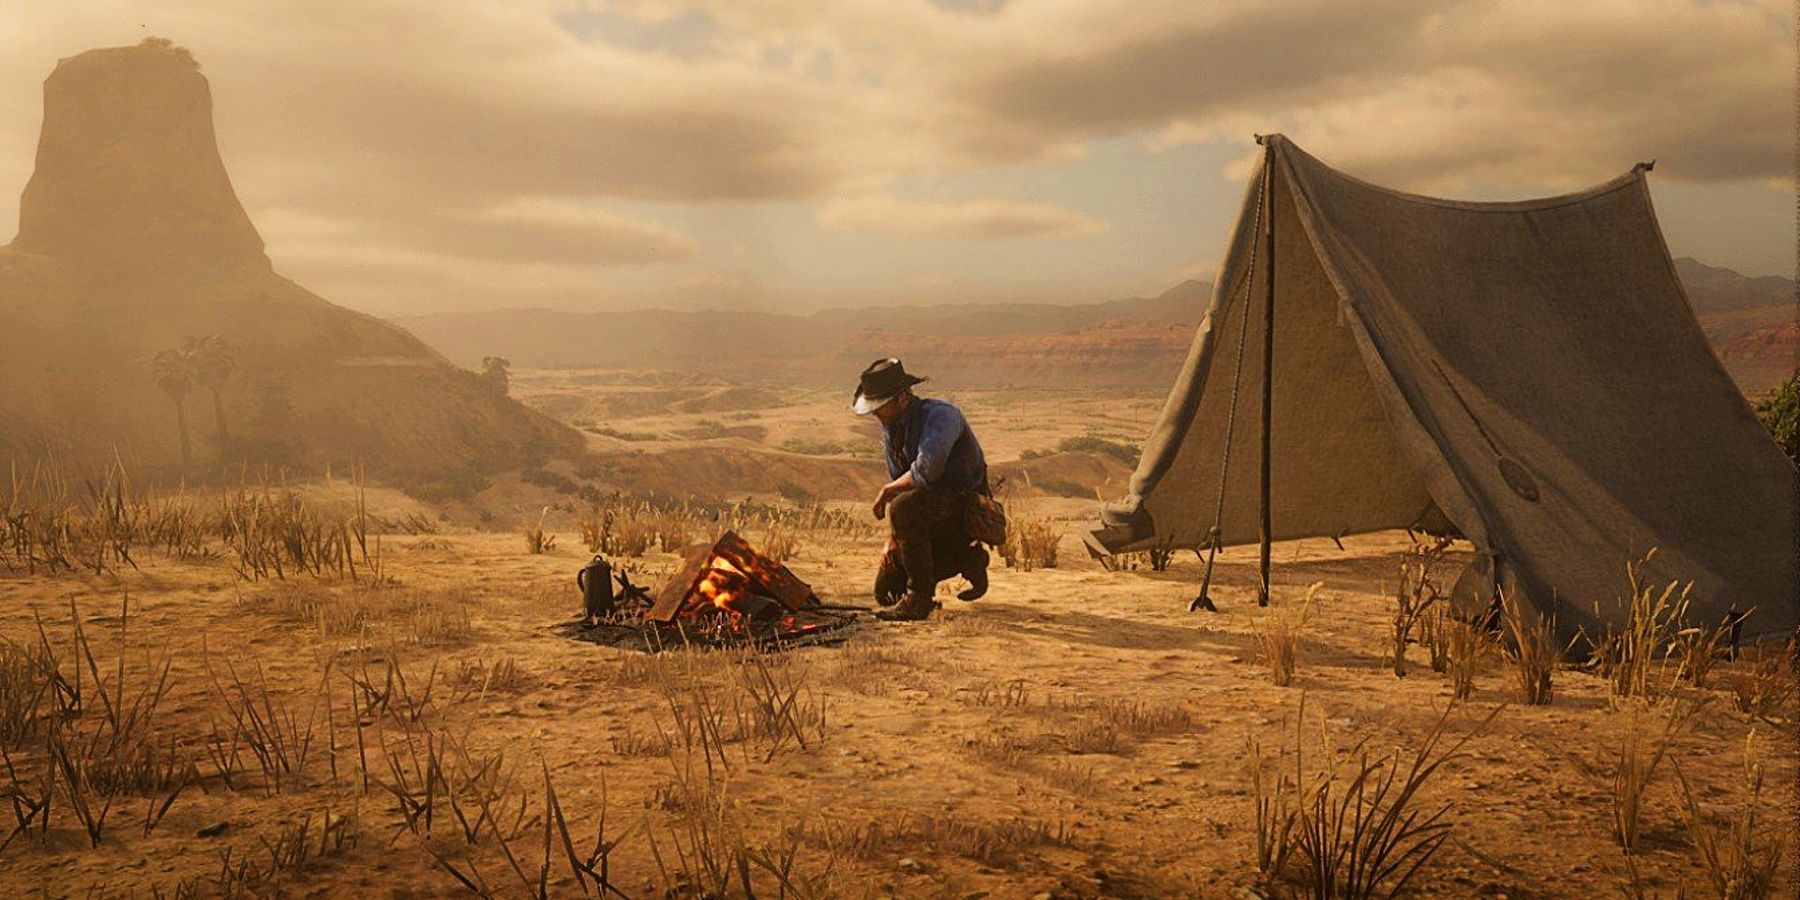 Arthur is kneeling in front of a campfire in his temporary camp atop a plateau in the desert.